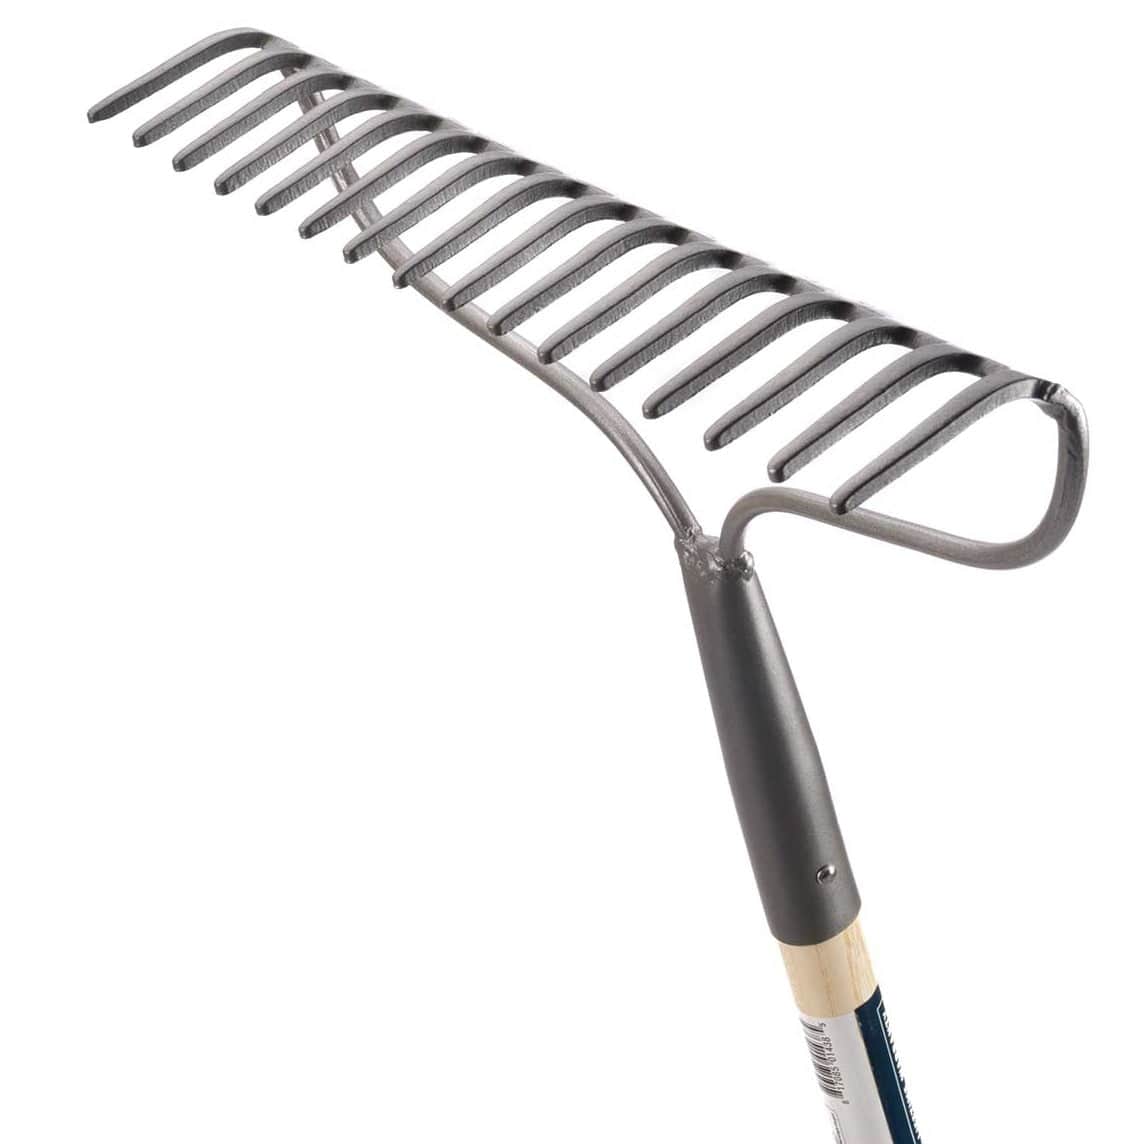 Gemplers Forged Bow Rake with Wood Handle